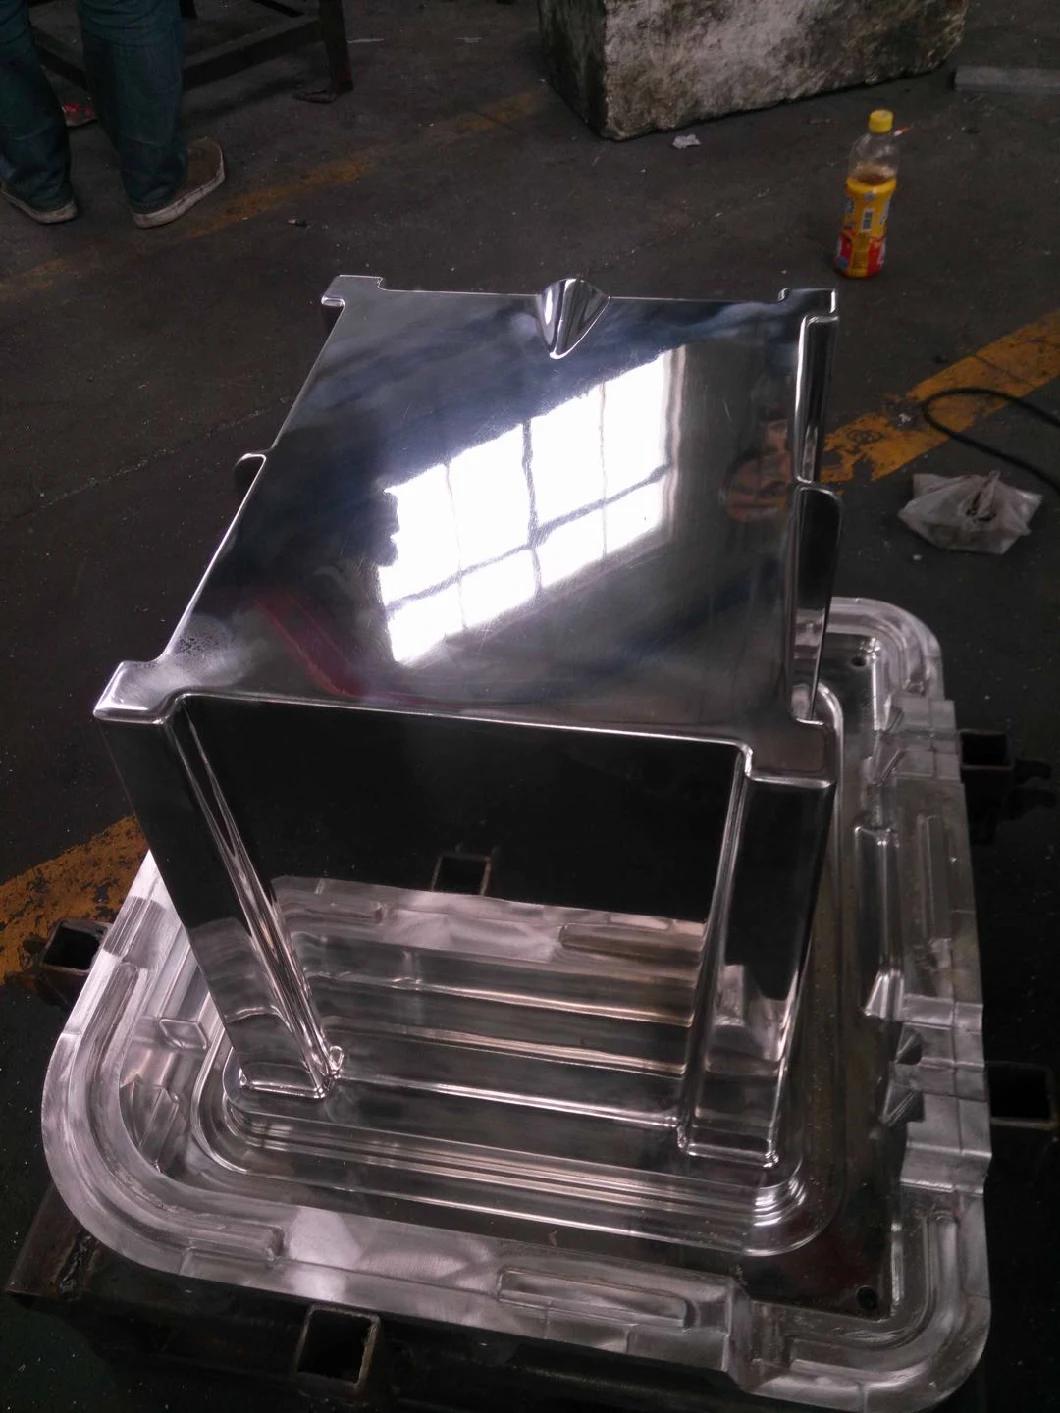 OEM ODM Plastic Products Mold for Rotational Molding Fishing Boat Kayak Aluminum Mould with Mirror Polishing Cooler Box Tooling